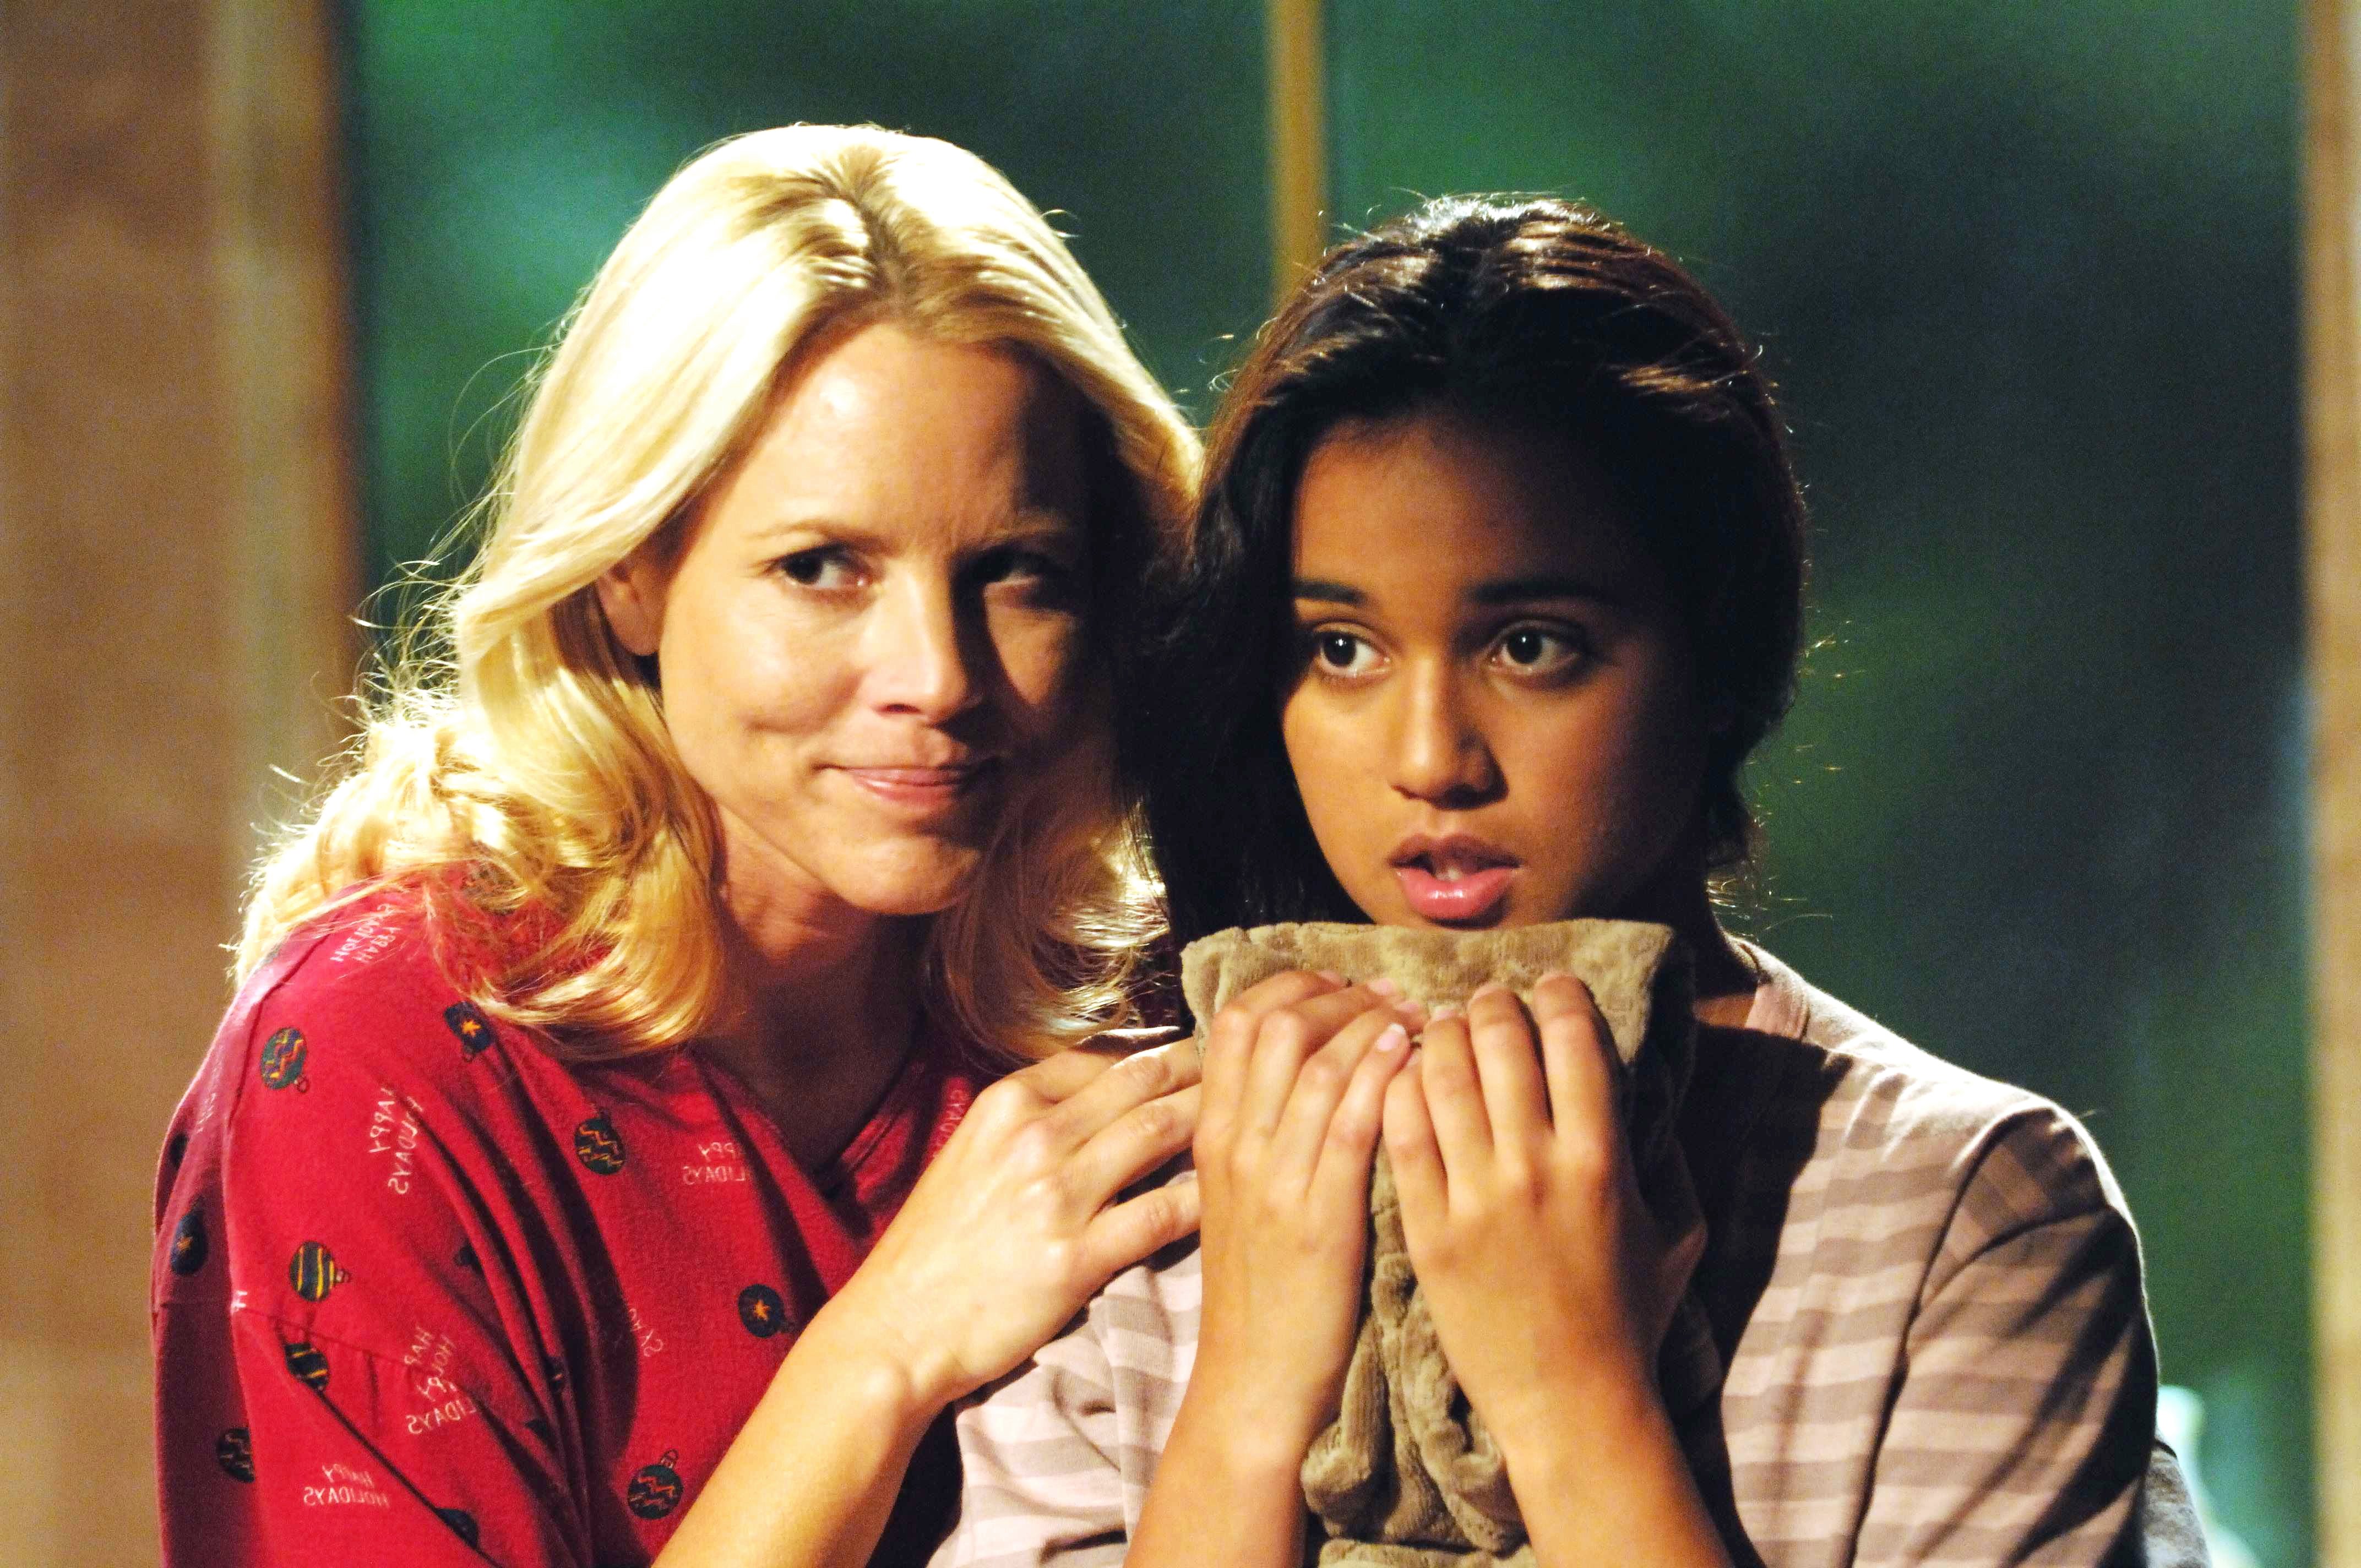 Maria Bello stars as Gail Monahan and Summer Bishil stars as Jasira Maroun in Warner Independent Pictures' Towelhead (2008). Photo Credit by Dale Robinette.